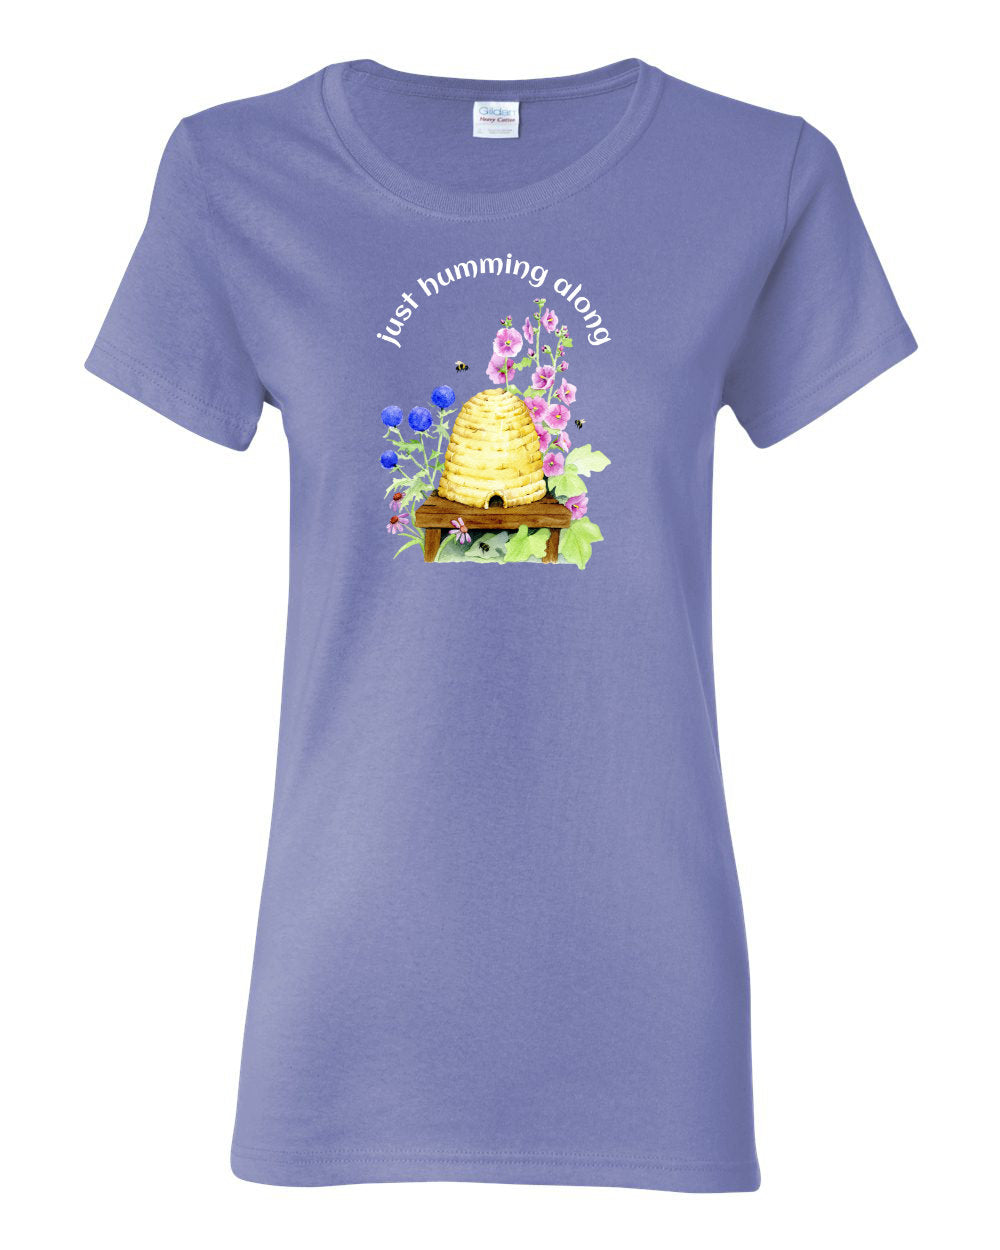 Just Humming Along - Adult Women's Tee